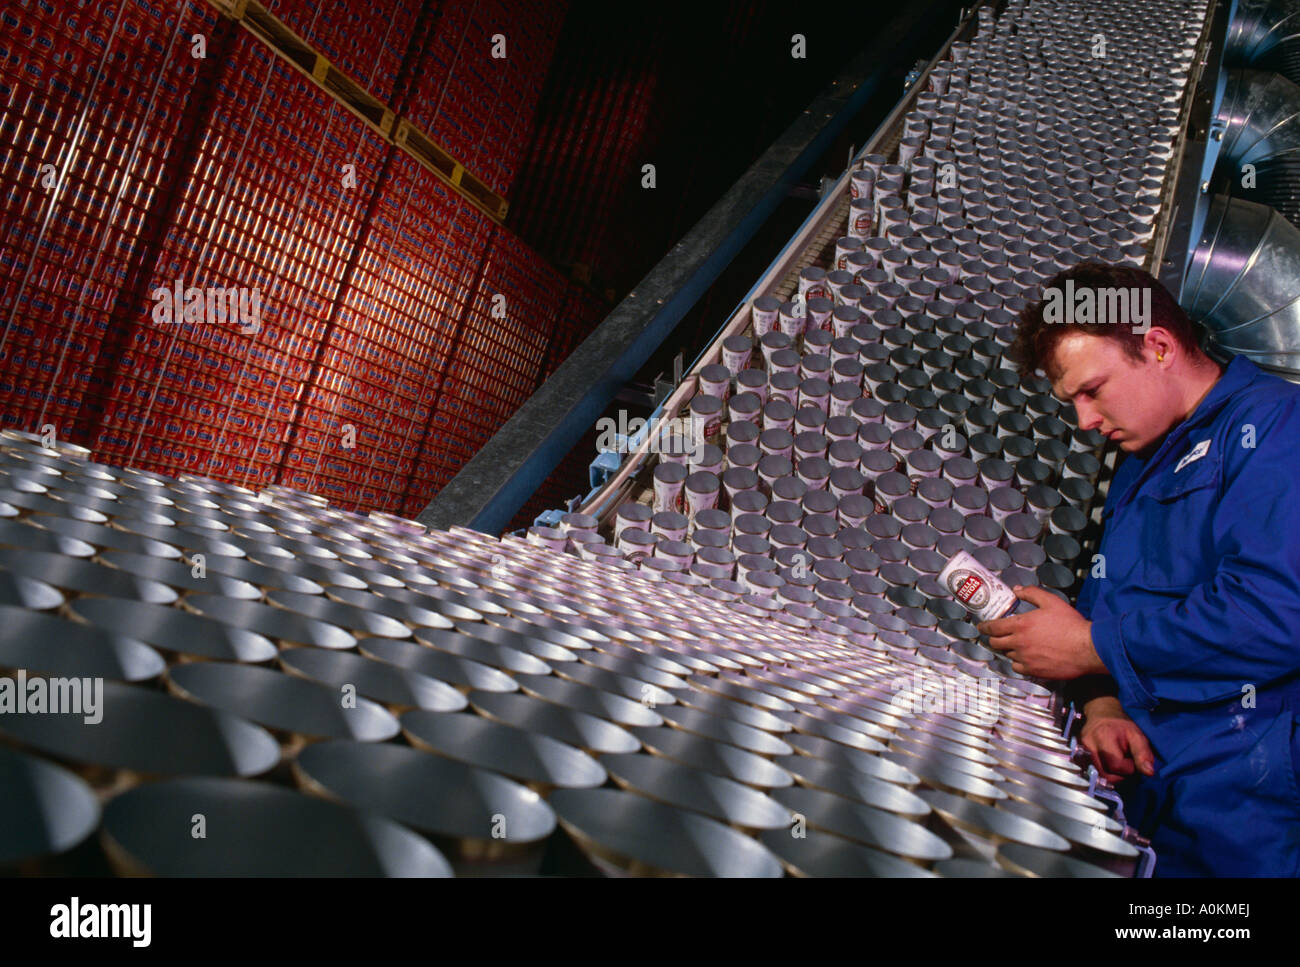 Aluminium can manufacture at a factory in England Stock Photo